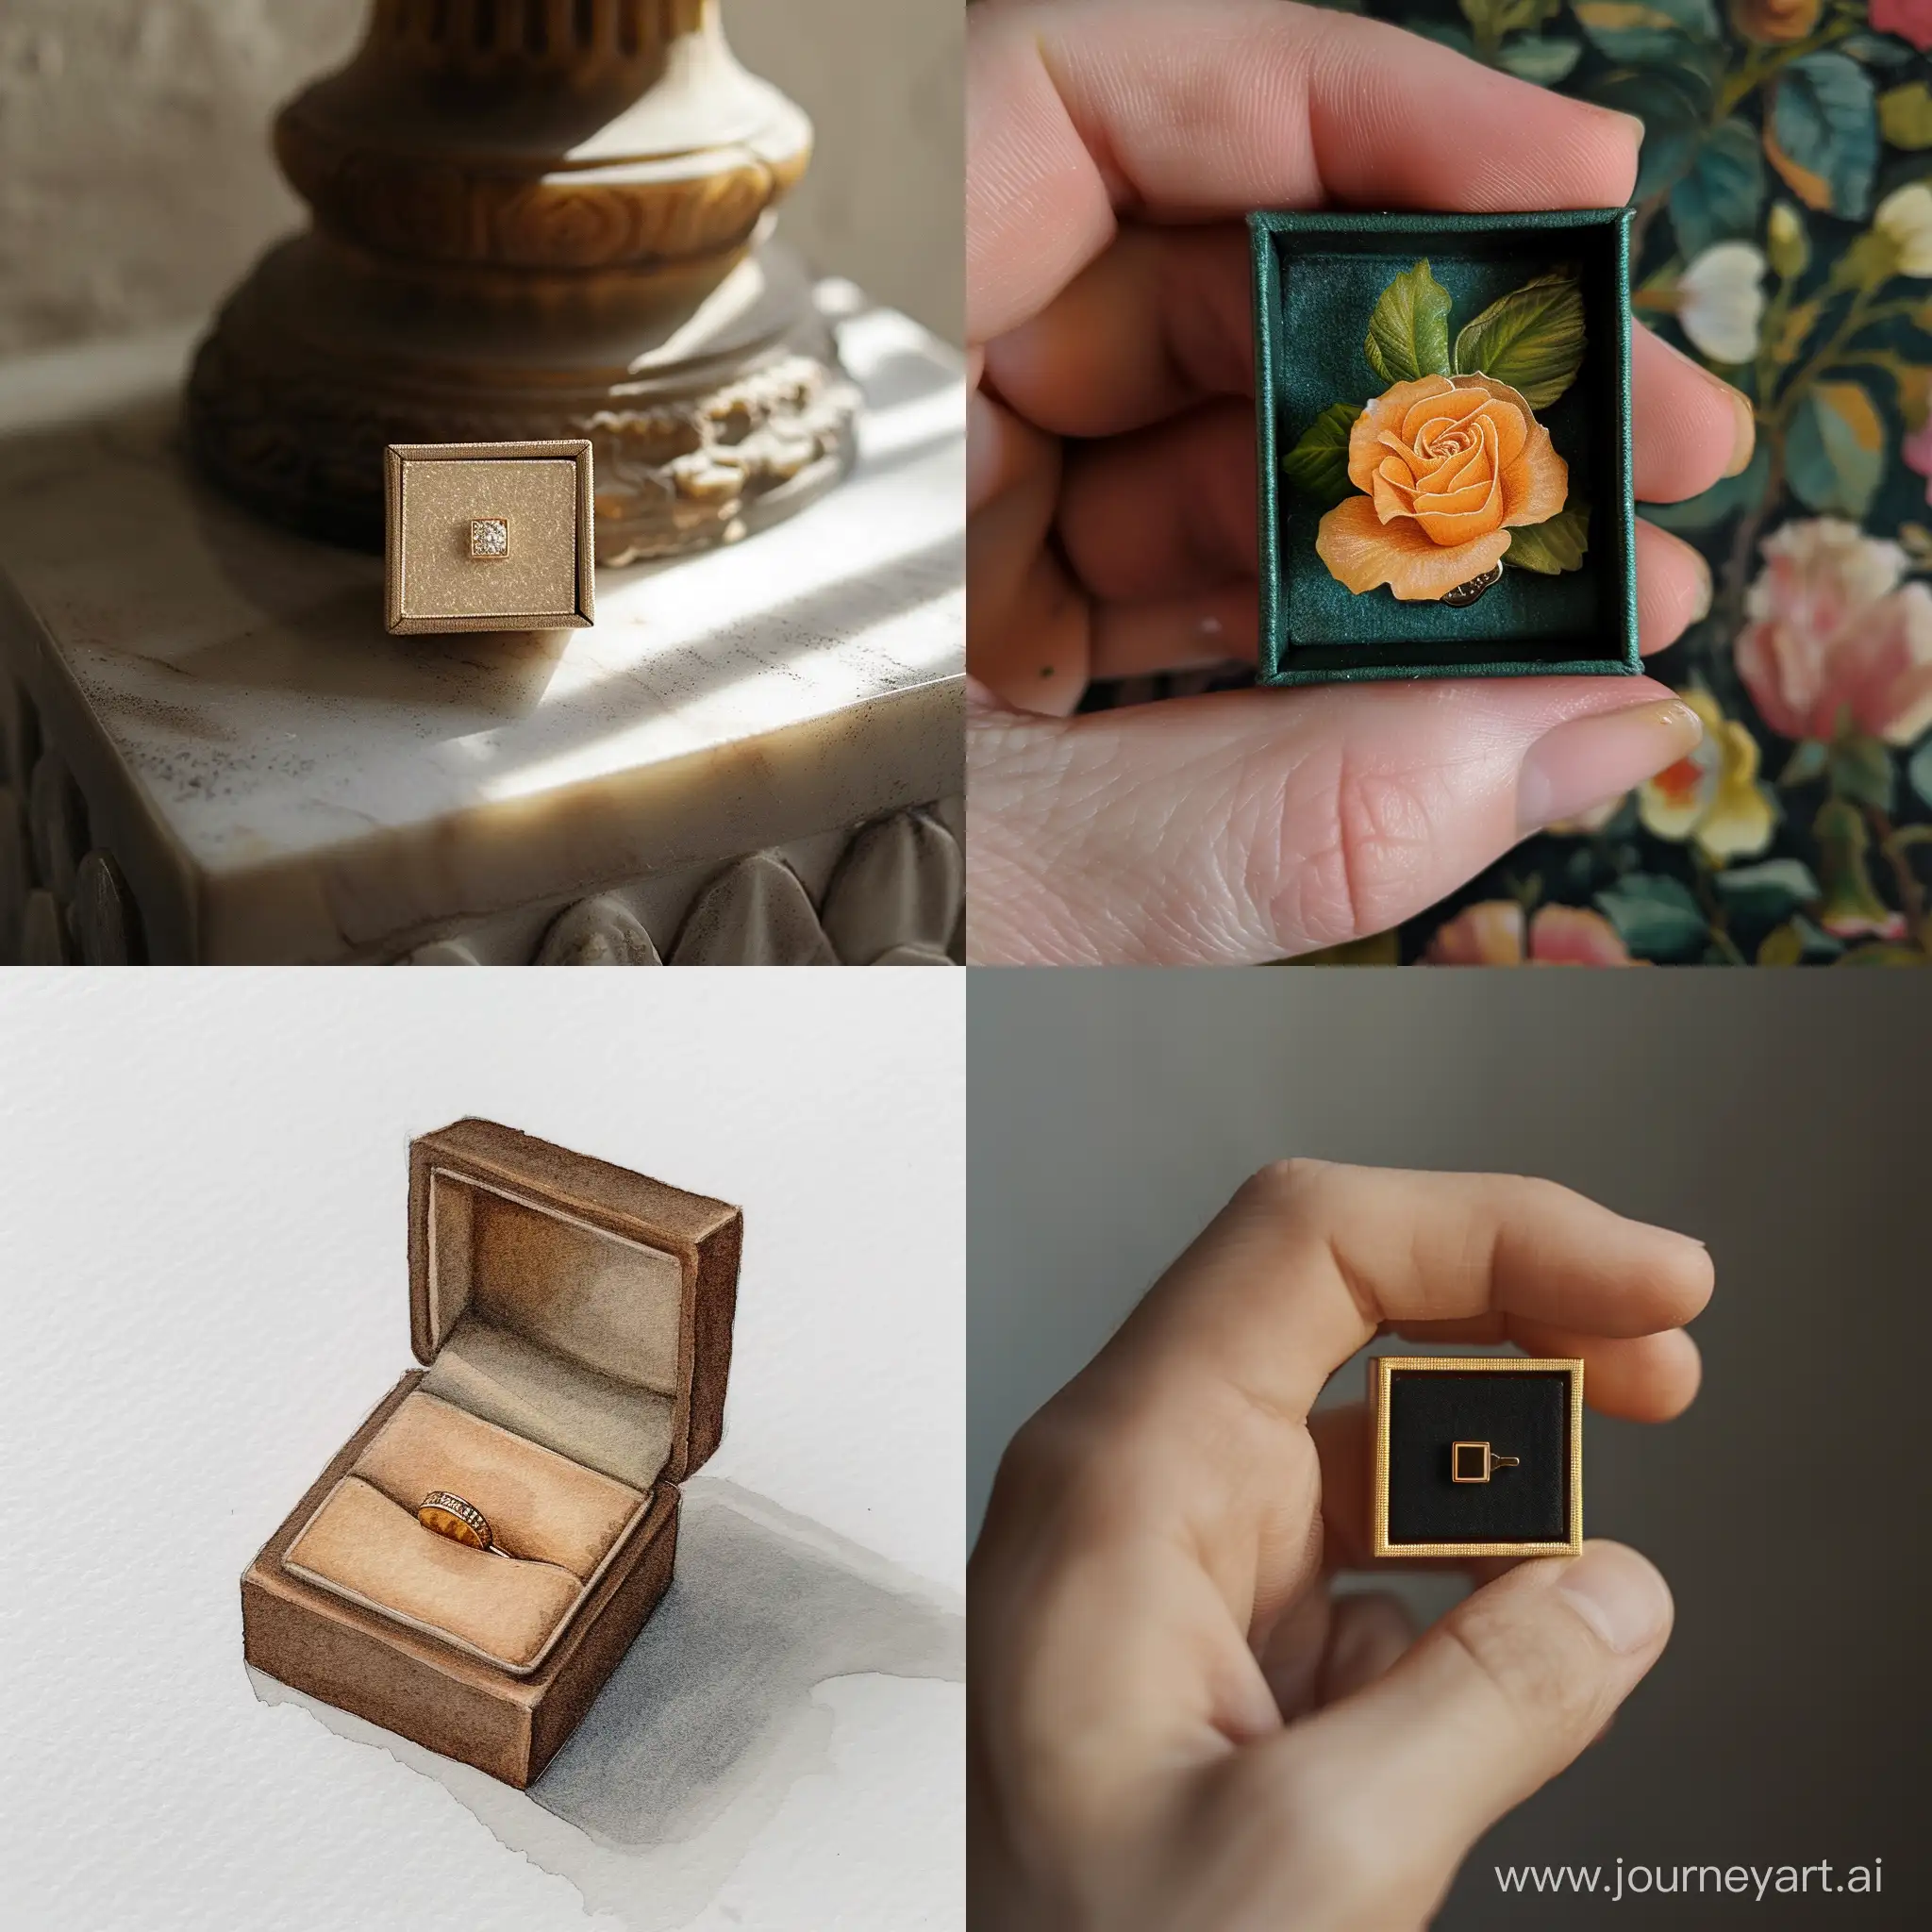 Enchanting-Miniature-Universe-Photorealistic-Student-Unboxes-Mysterious-Pin